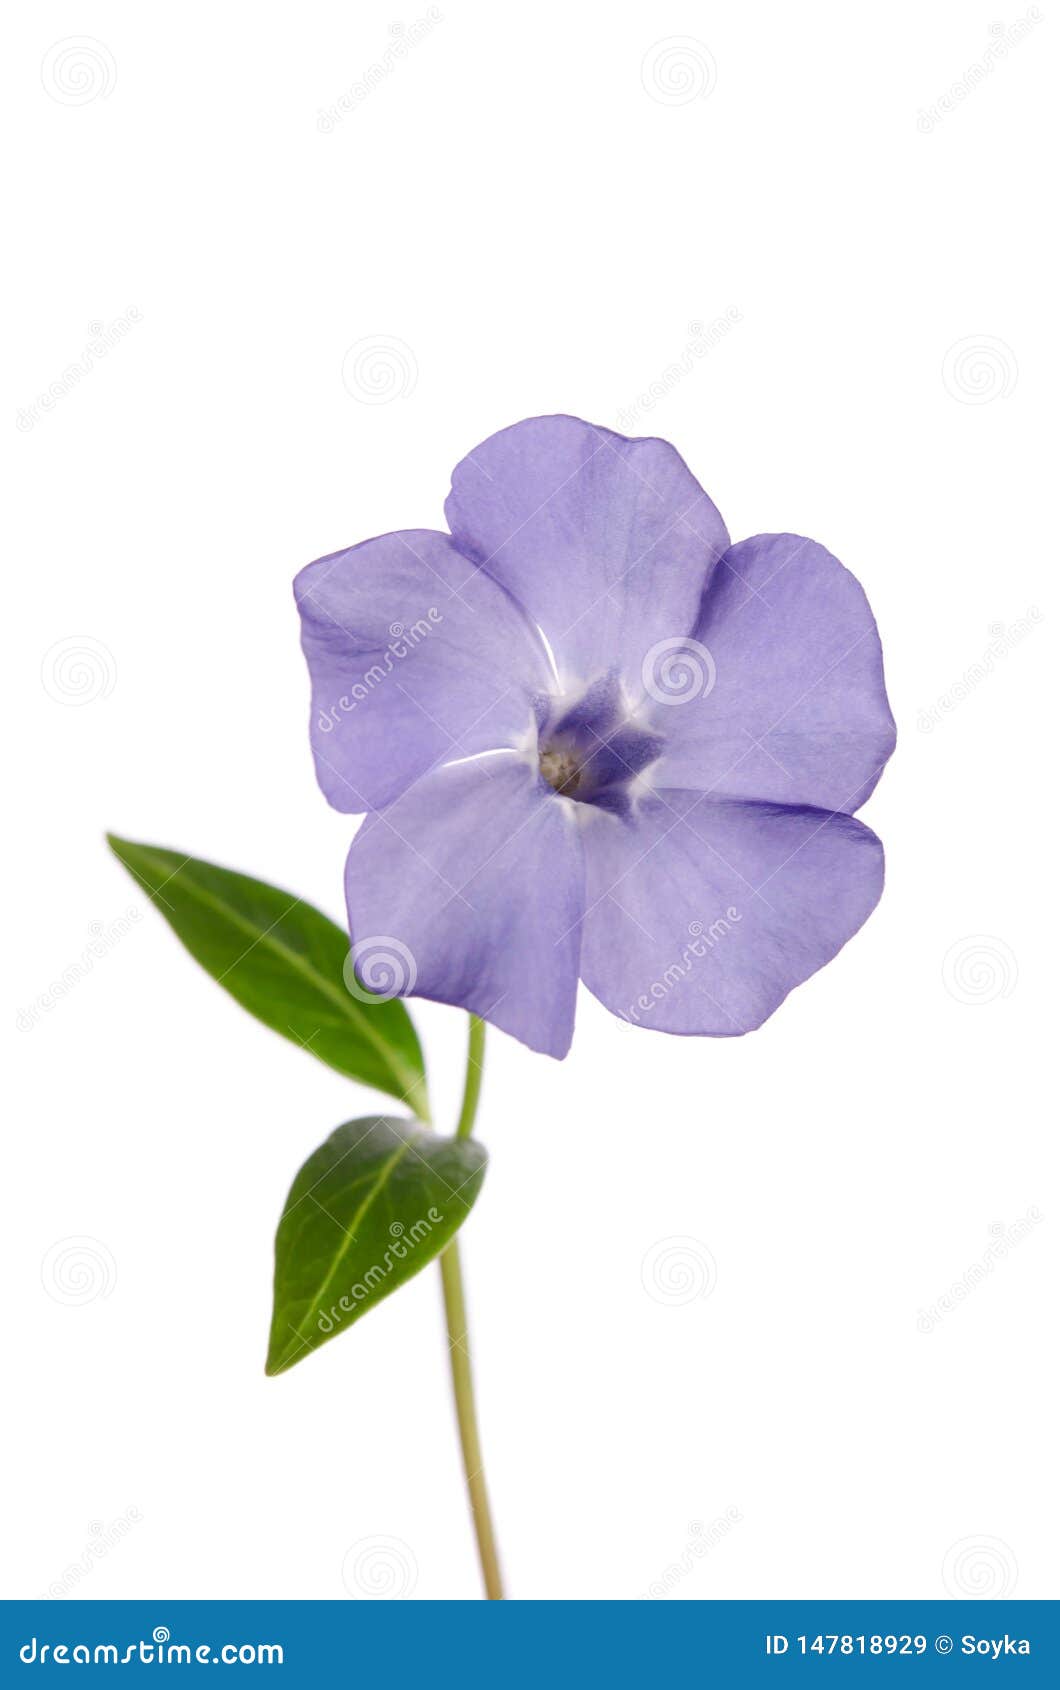 Periwinkle Flower Isolated On White Background Stock Image Image Of Macro Floral 147818929